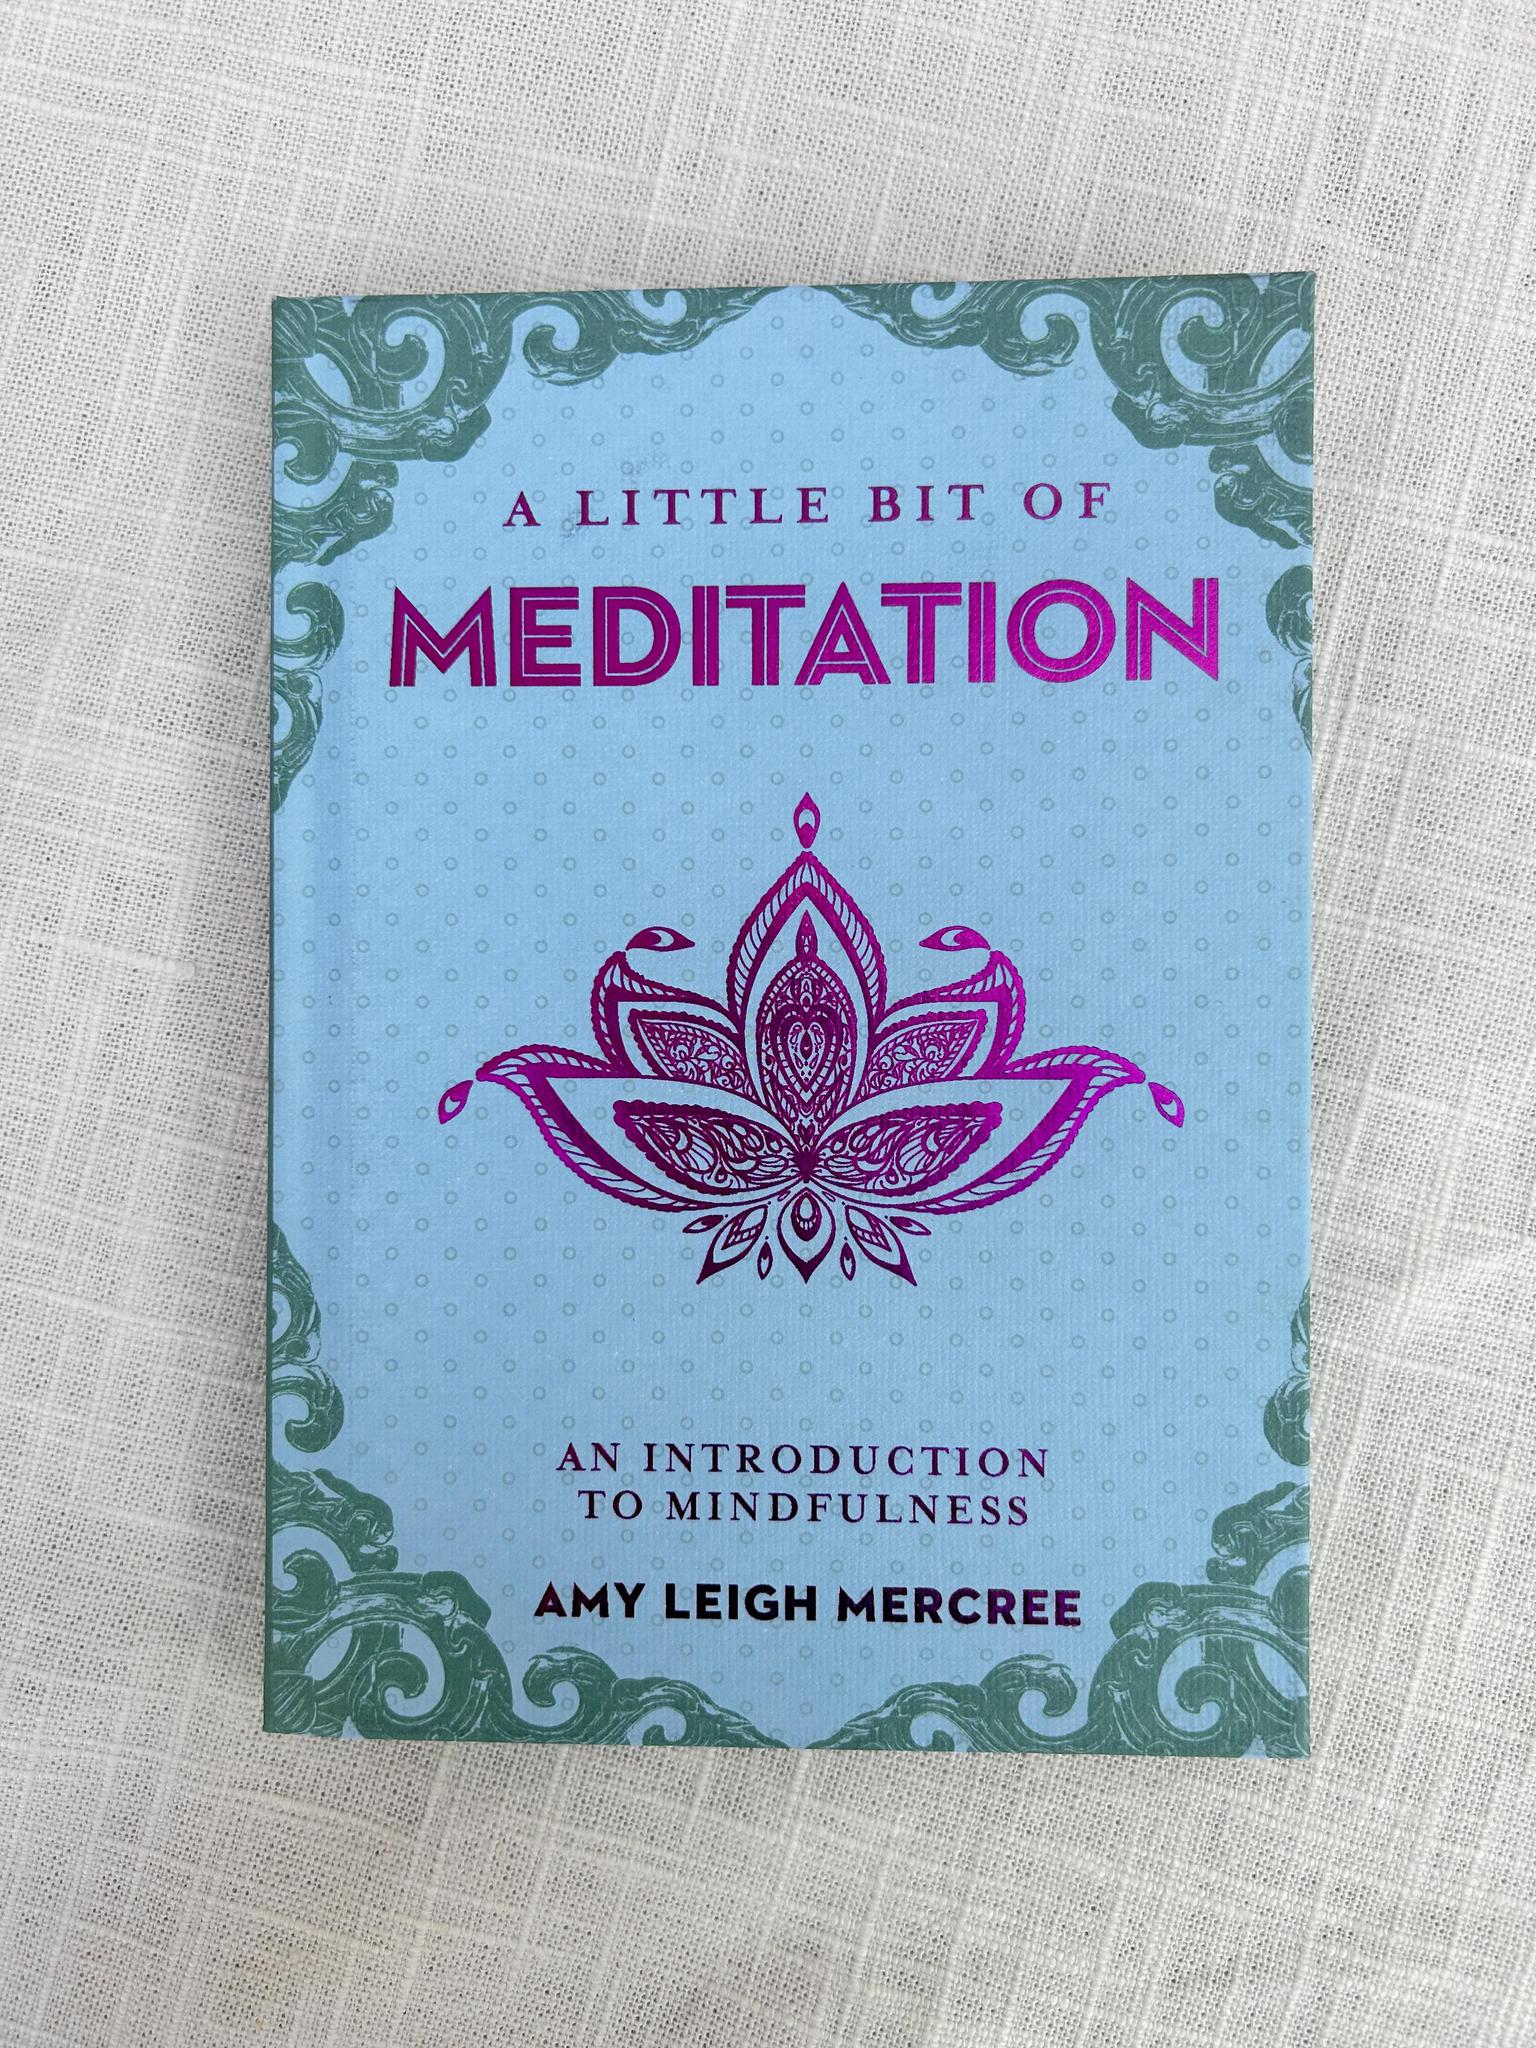 A Little Bit of Meditation book: an introduction to mindfulness